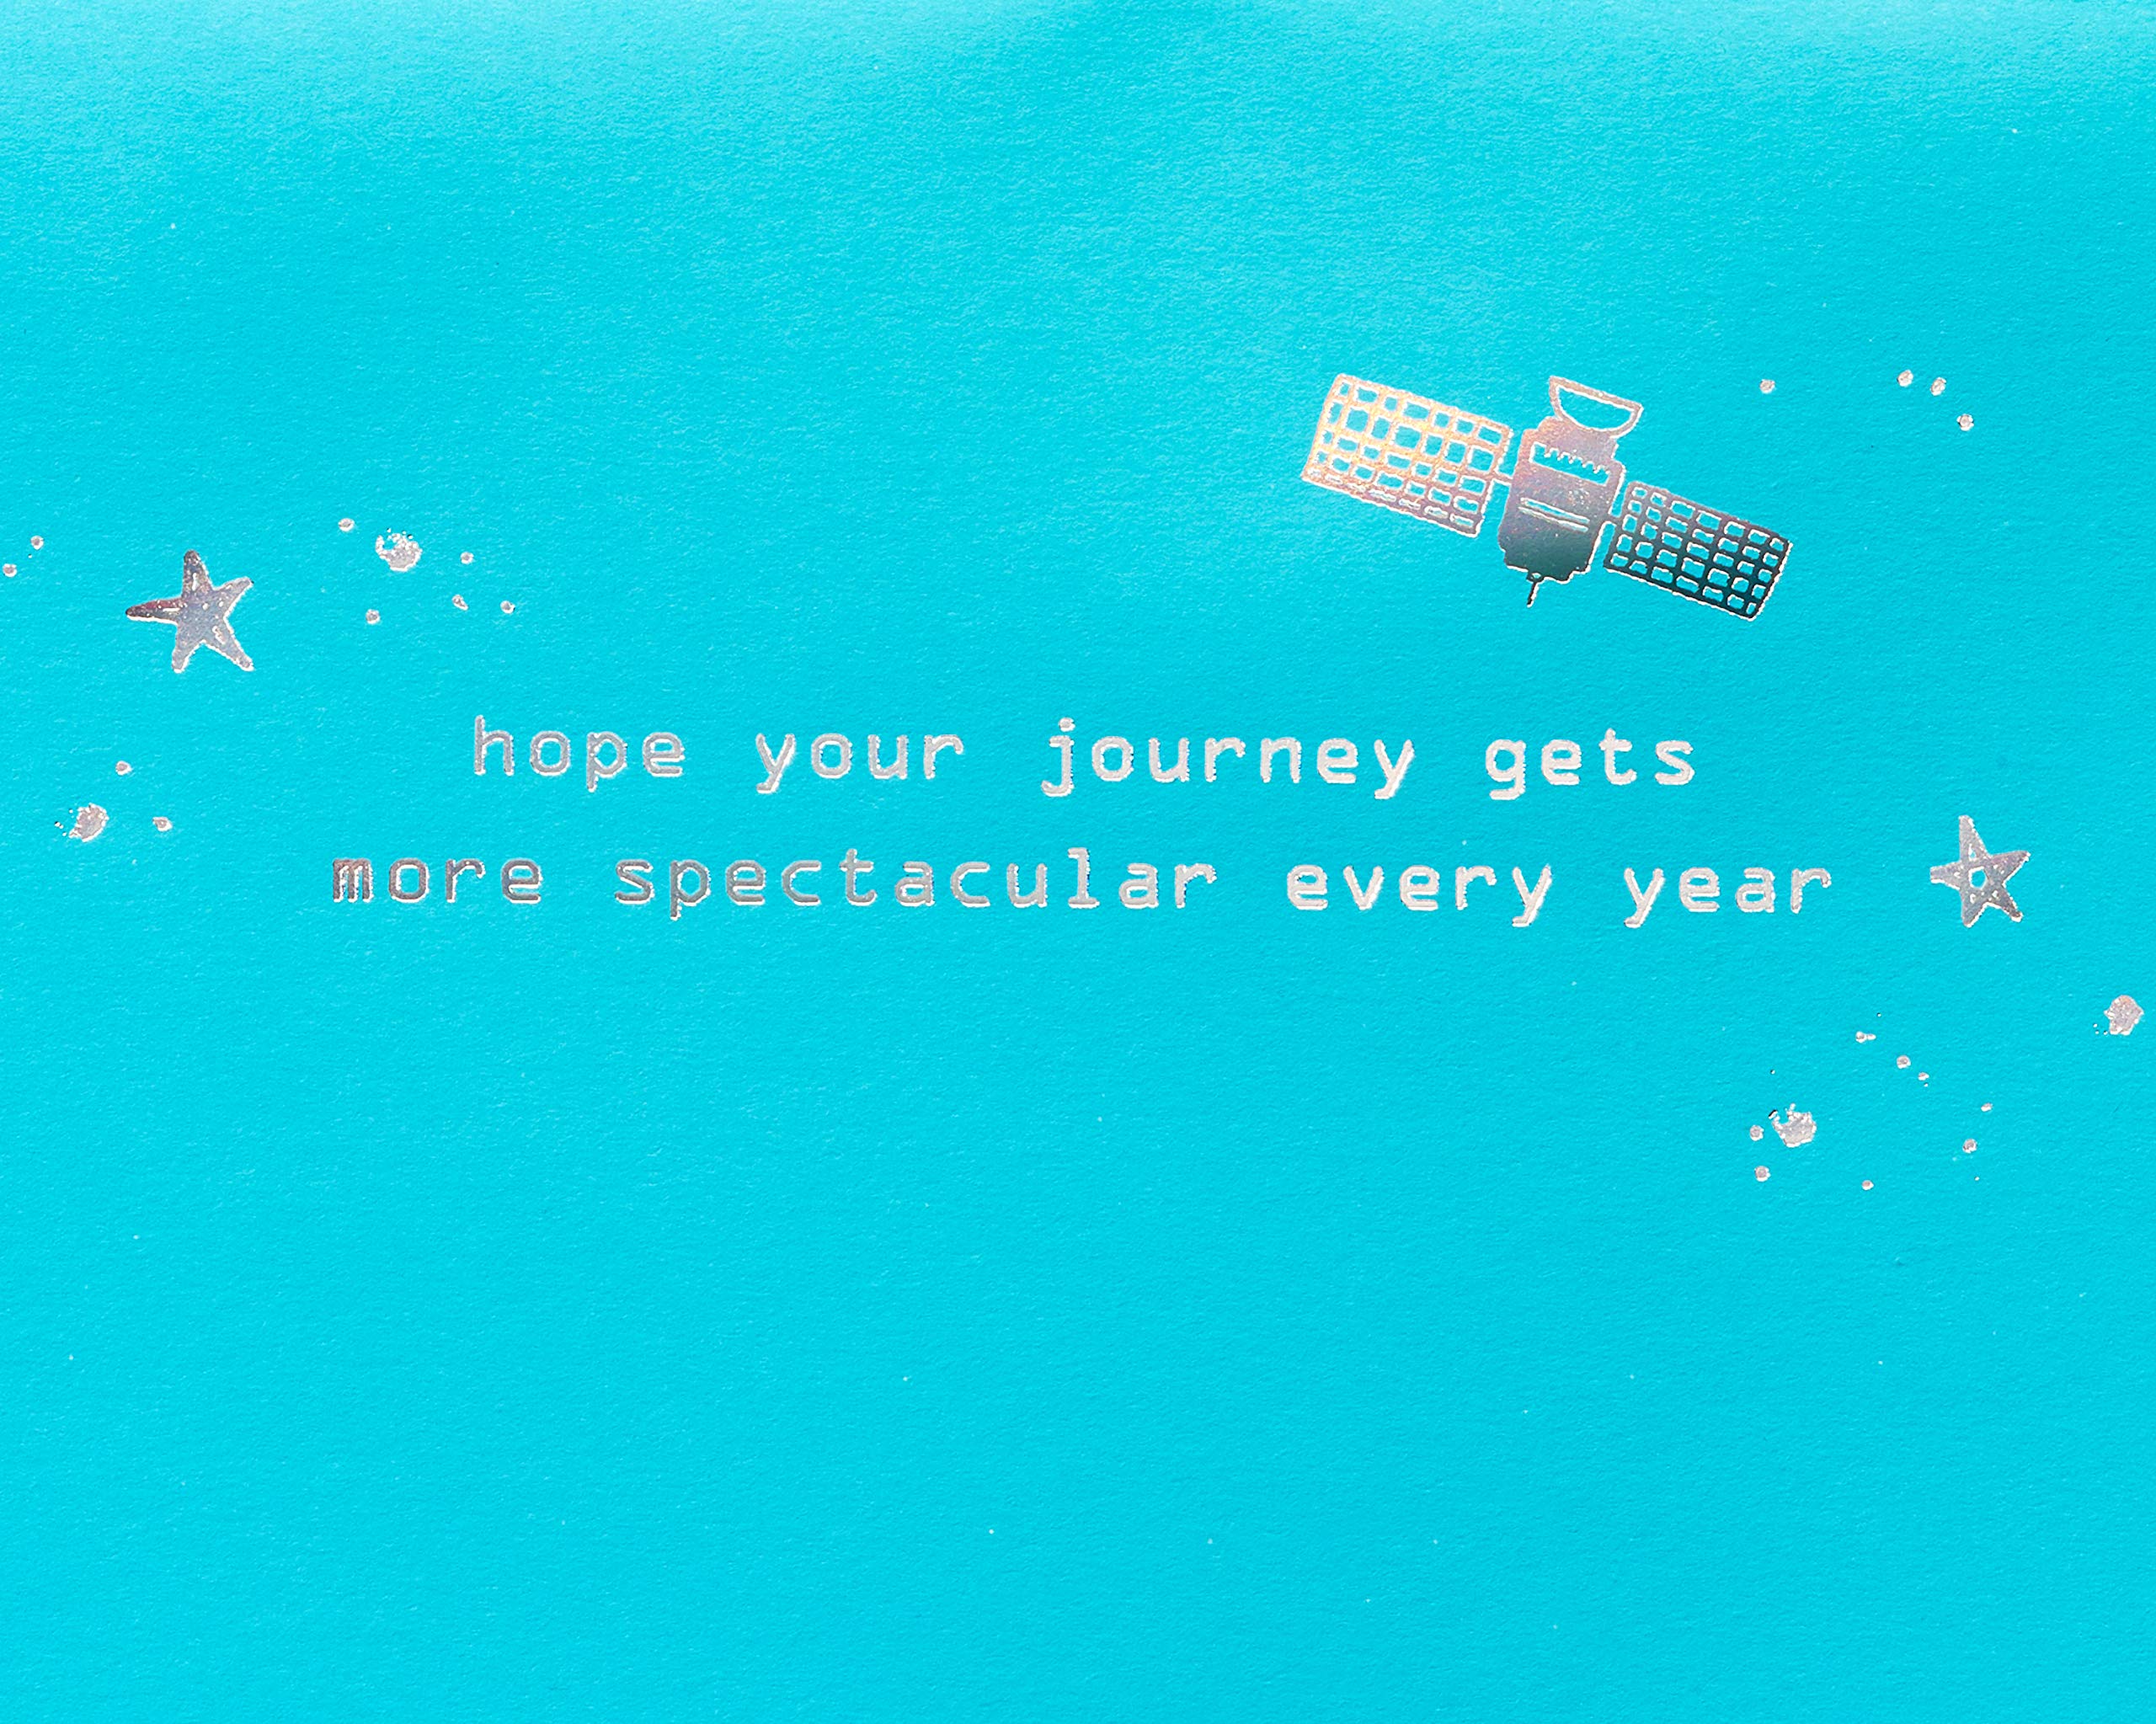 Papyrus Space Birthday Card (Journey Gets More Spectacular)